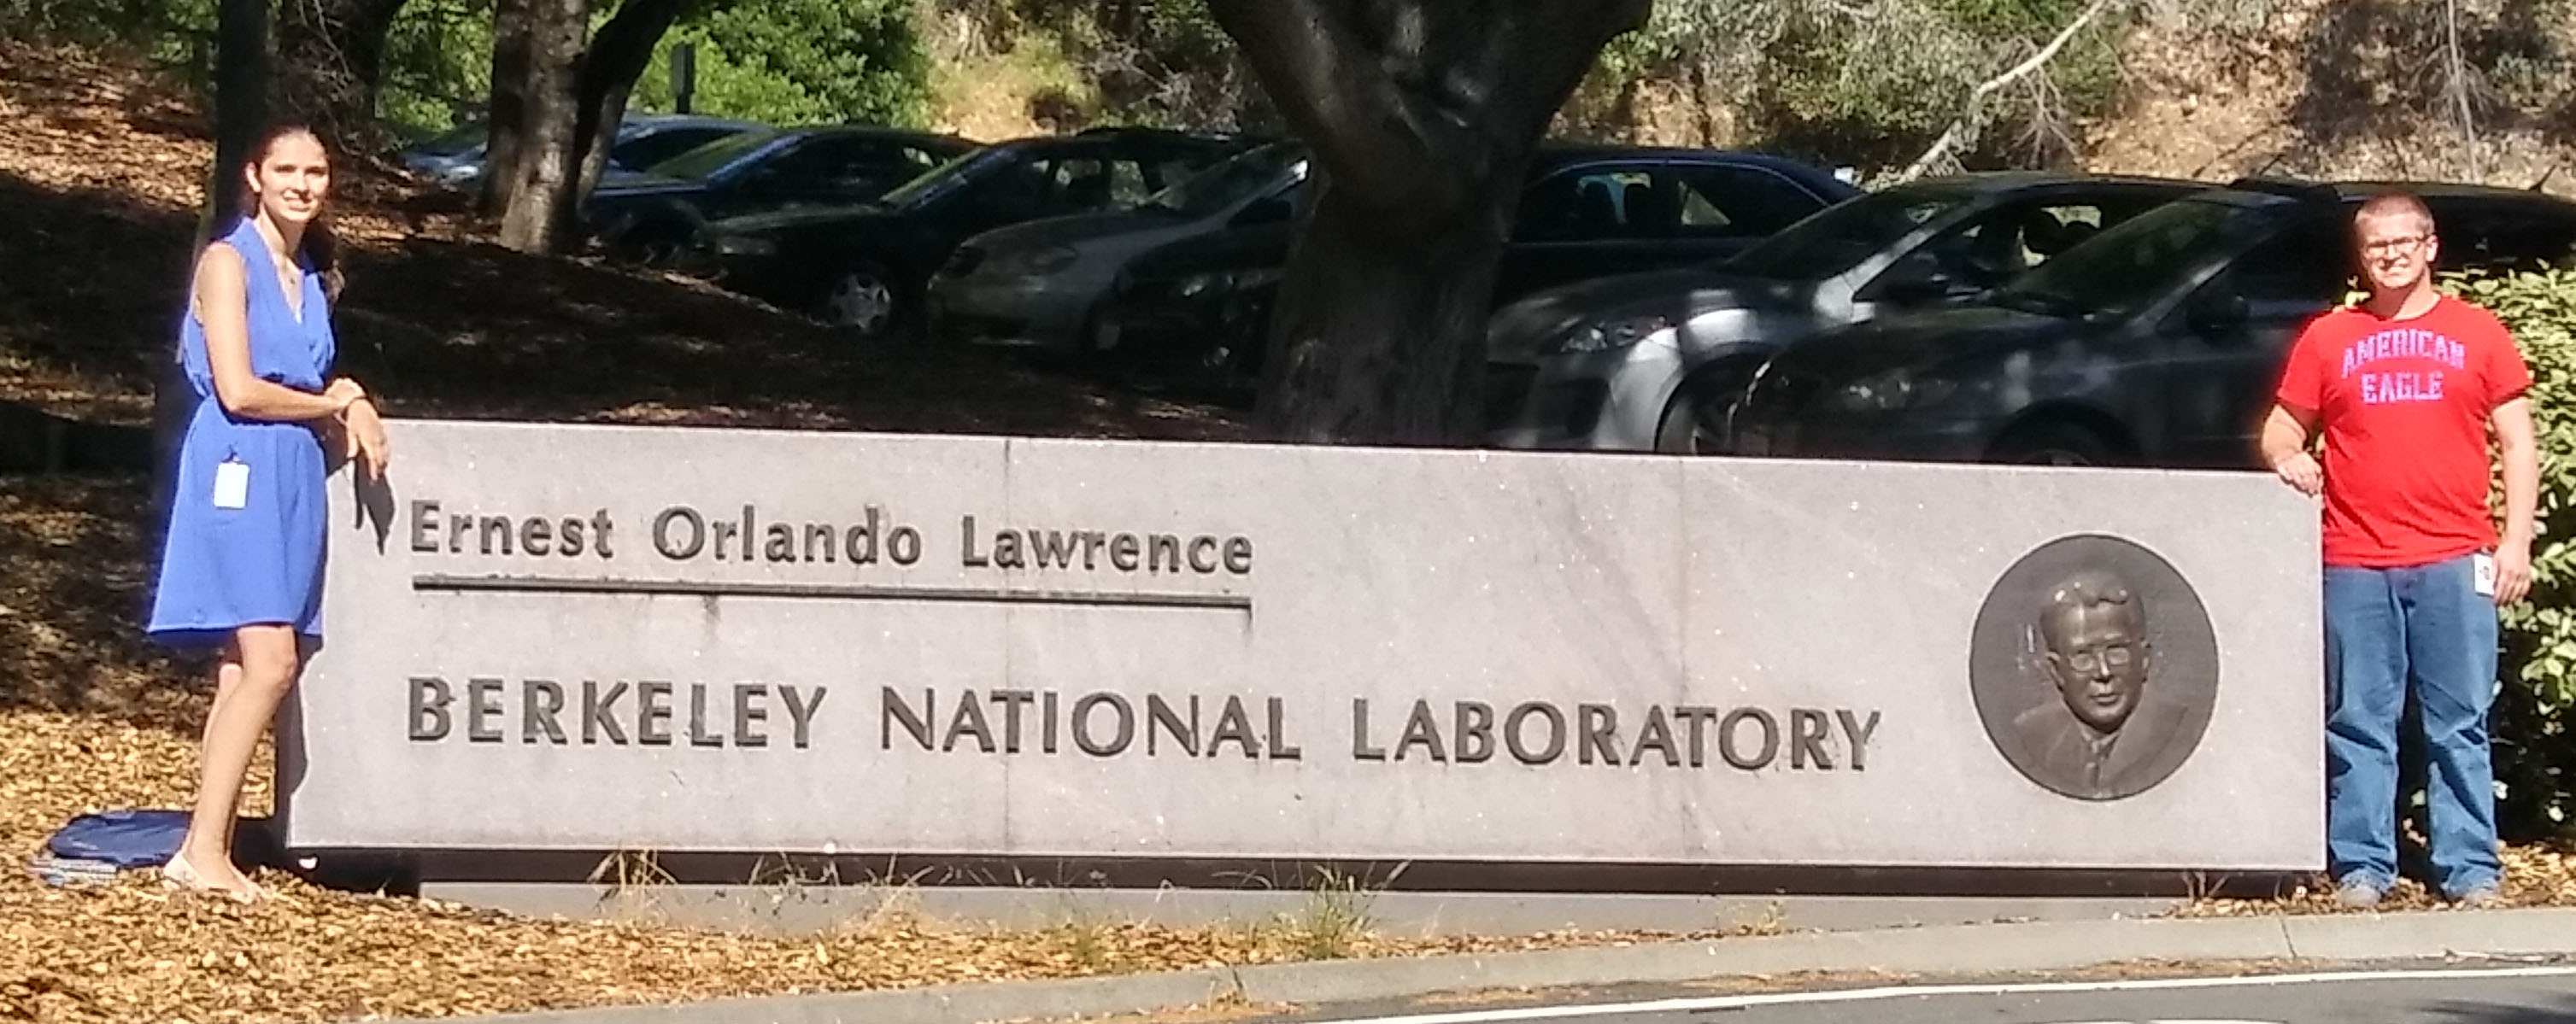 Alexandra Ballow and Tyler Leibengood stand beside the Lawrence Berkeley National Laboratory sign